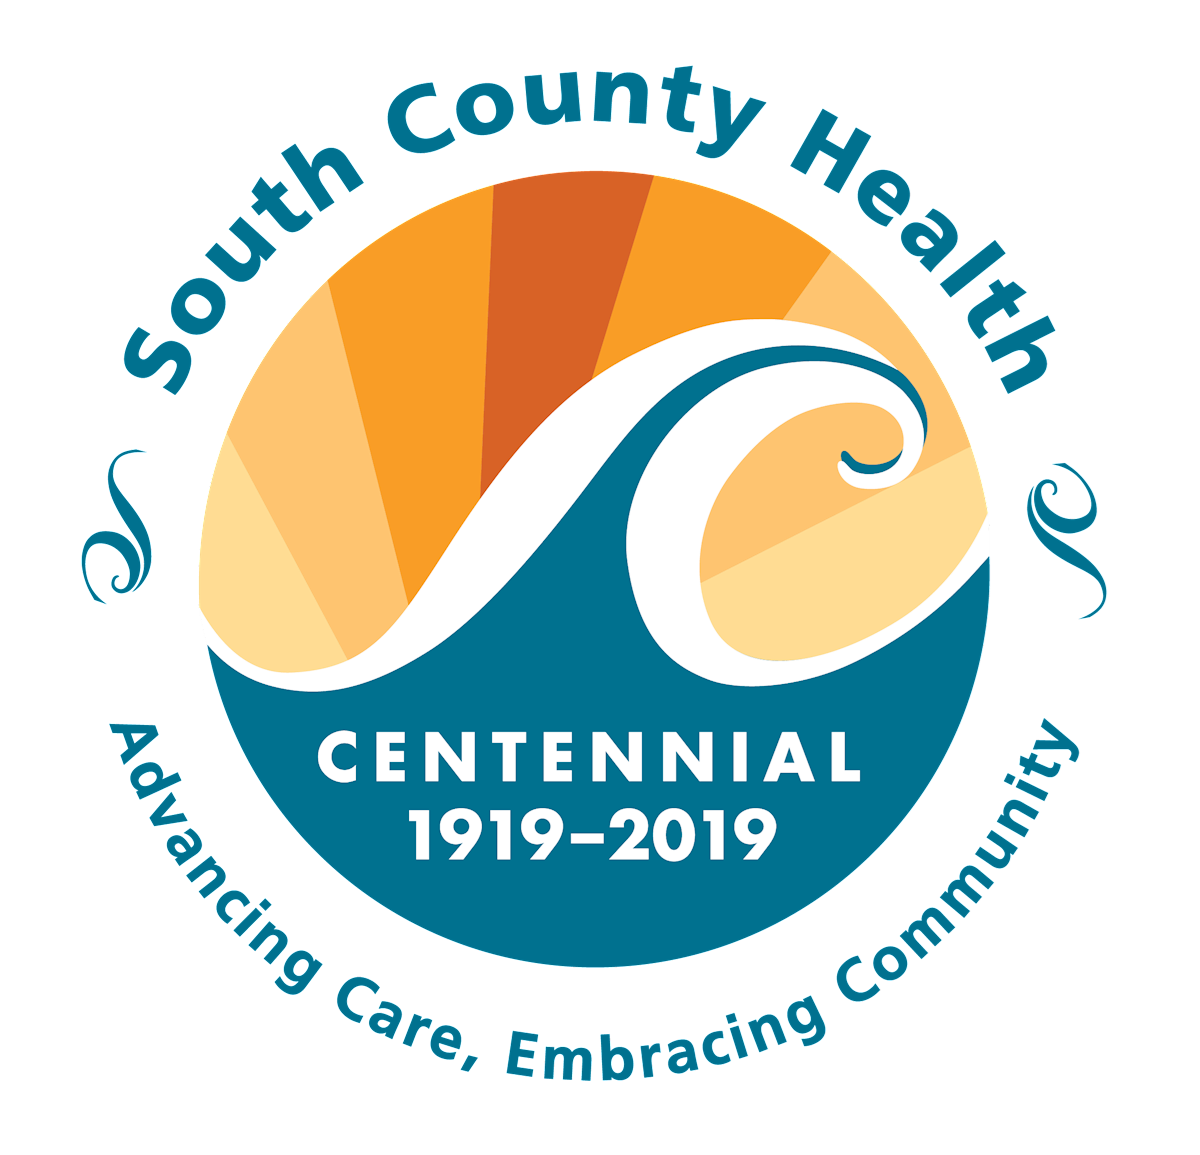 South County Health unveils Centennial timeline